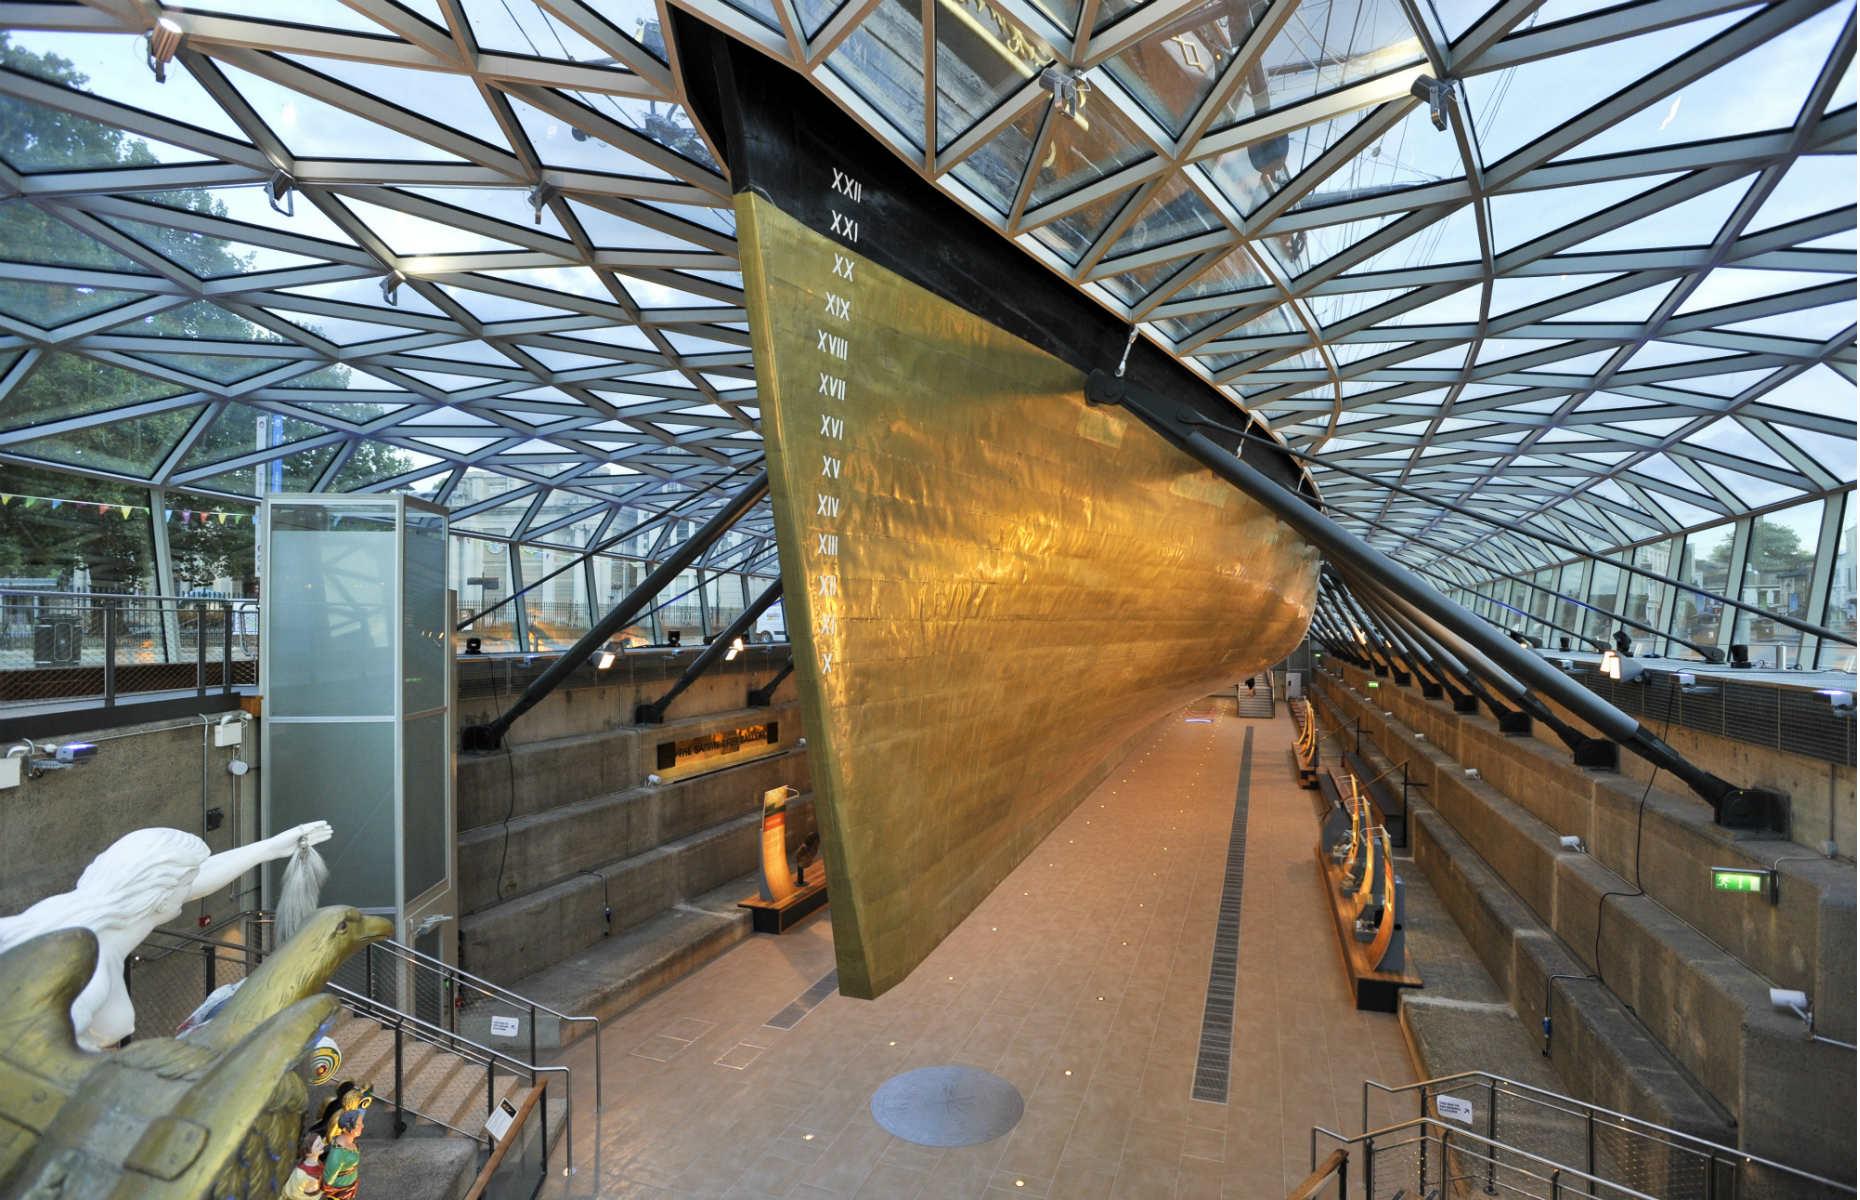 <p>You can walk beneath the hull, see the captain’s table and take the ship’s wheel – and from April 2022 you can even <a href="https://www.rmg.co.uk/cutty-sark/attractions/cutty-sark-rig-climb-experience">climb the rigging</a> (with pre booked tickets). Greenwich has a wealth of museums worth taking in, such as the Maritime Museum, Royal Observatory, the Queen’s House and Painted Hall, all part of the Naval College. The most appropriate way to get there is down the Thames on the Clipper ferry service.</p>